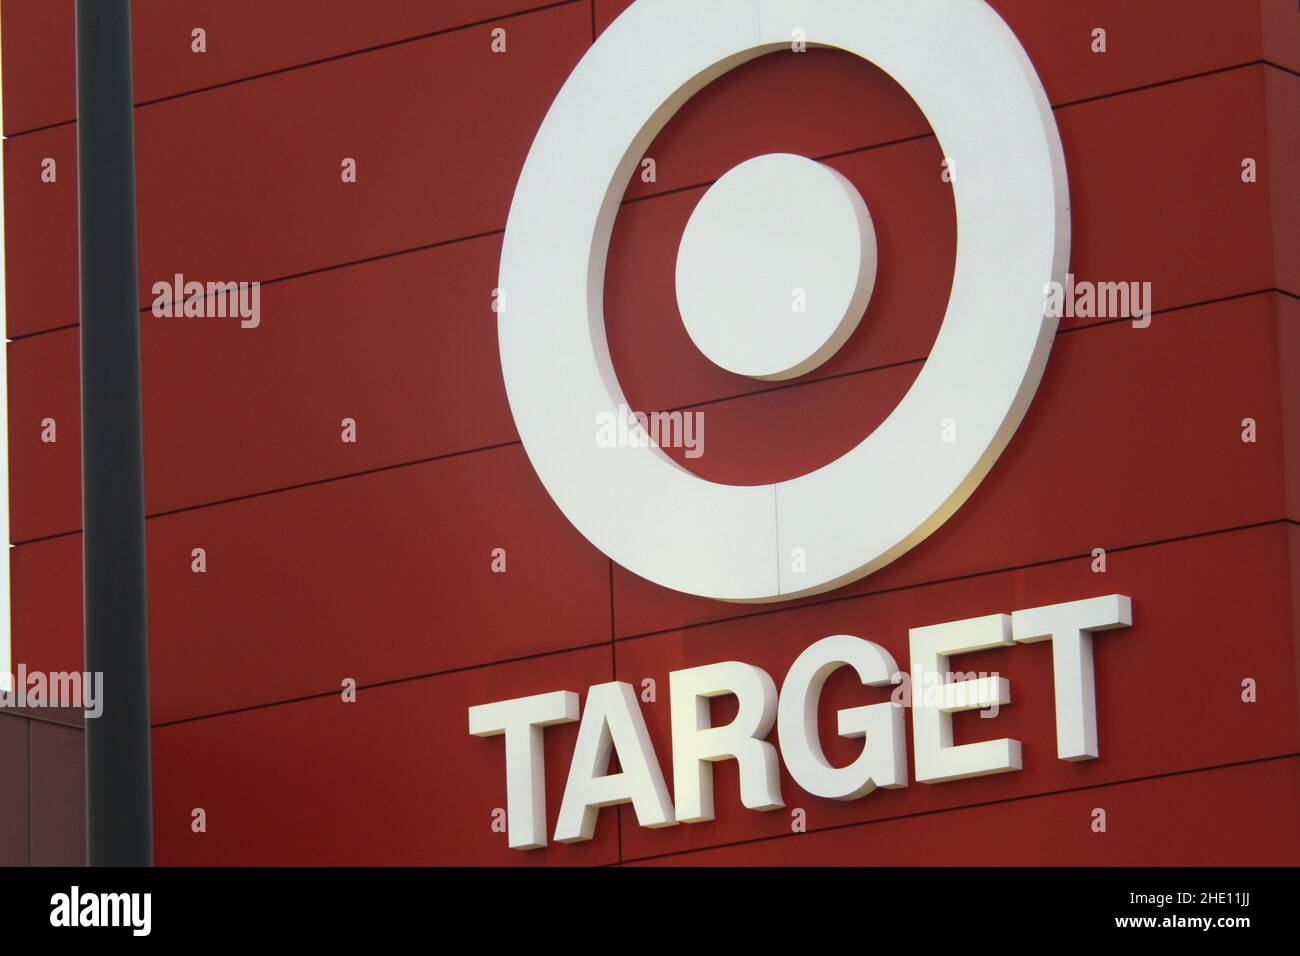 Bronx, NY - October 2, 2021: Target Corporation corporate logo on retail department store at the Throgs Neck Shopping Center. Stock Photo